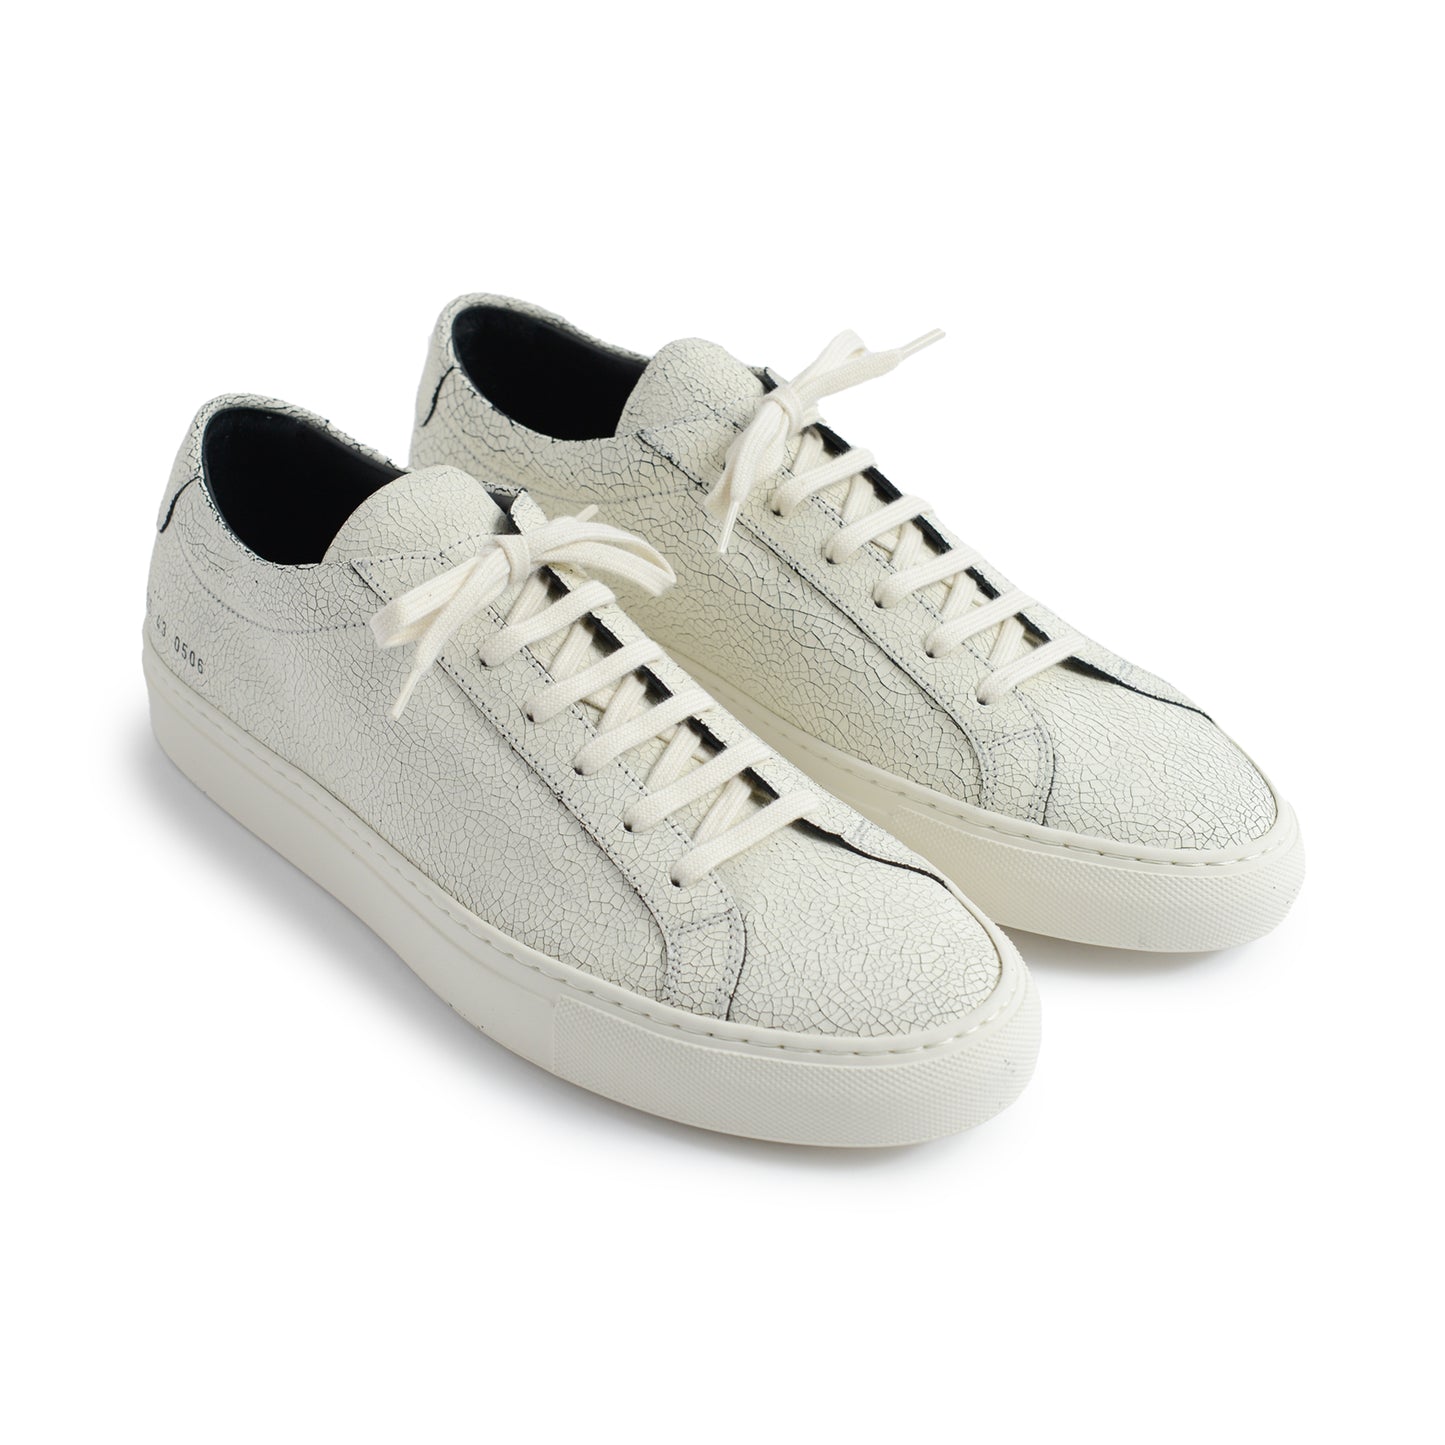 Common Projects Original Achilles Cracked-Leather Sneakers